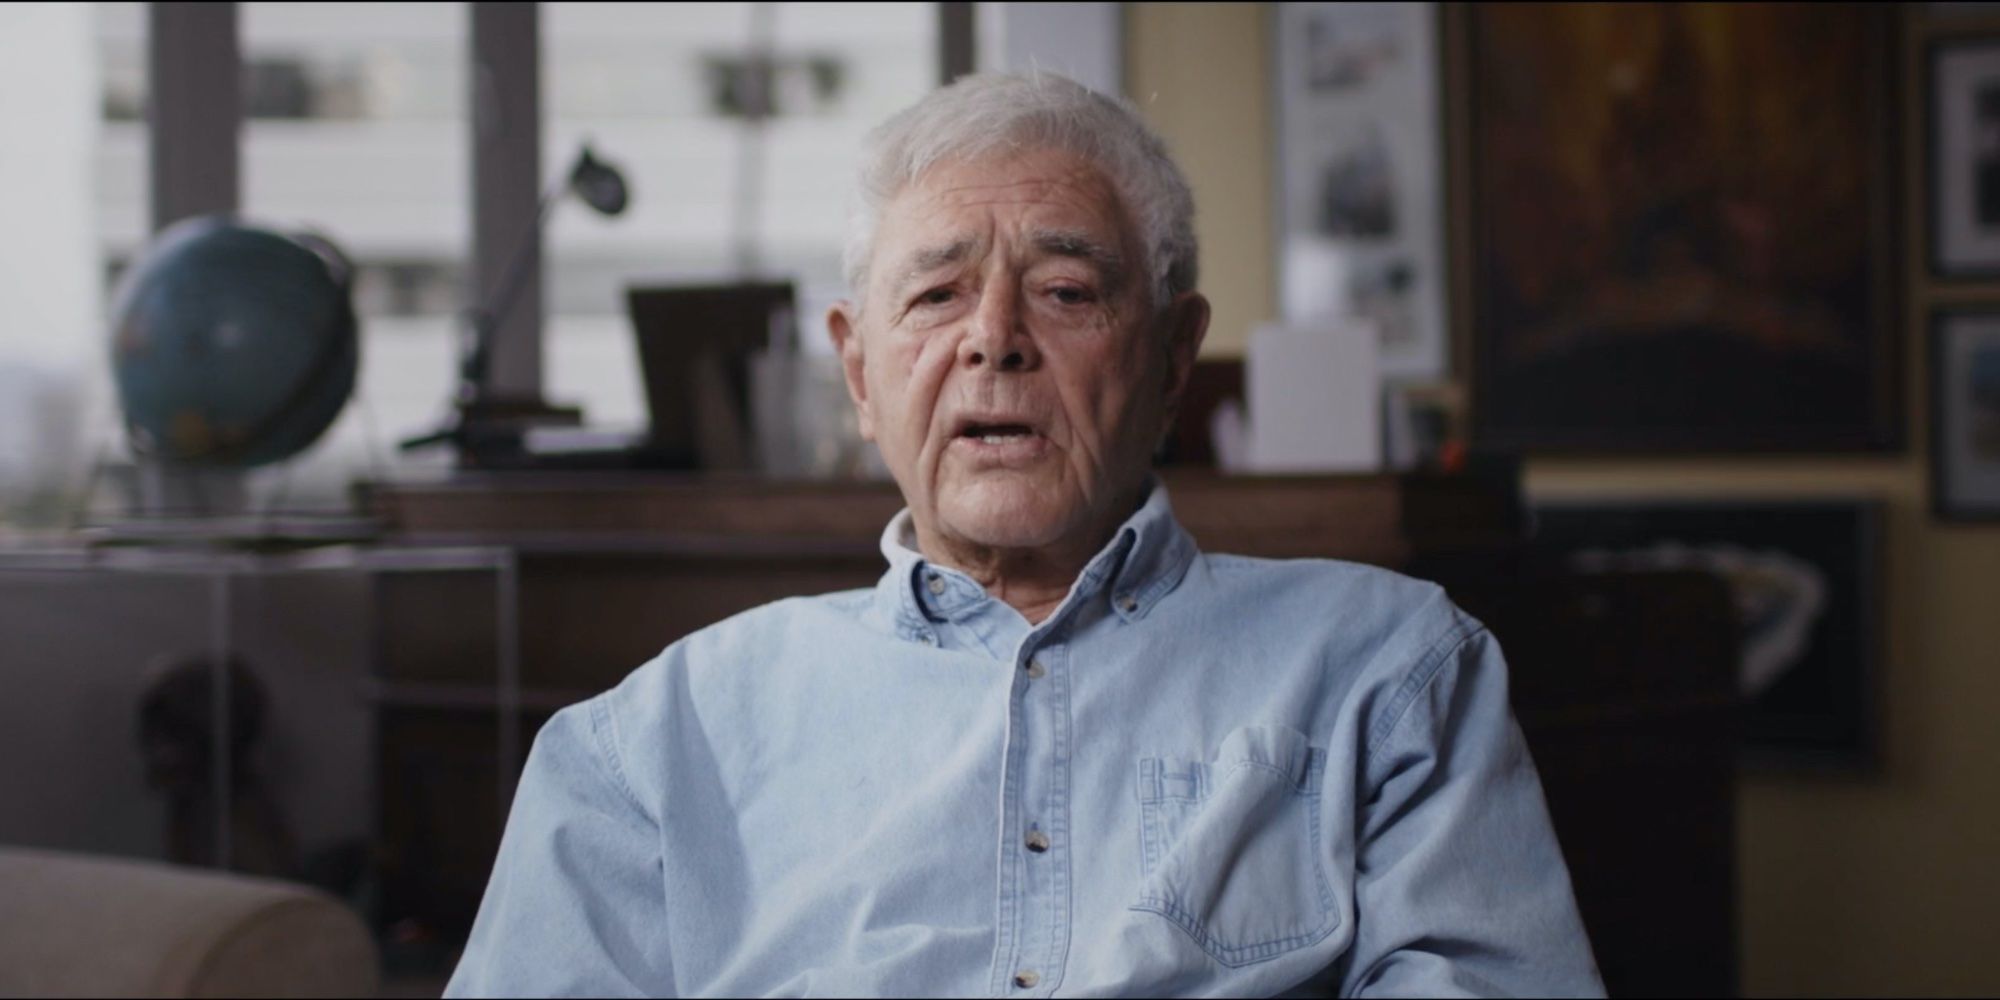 Richard Donner gives an interview in Cursed Films on Shudder